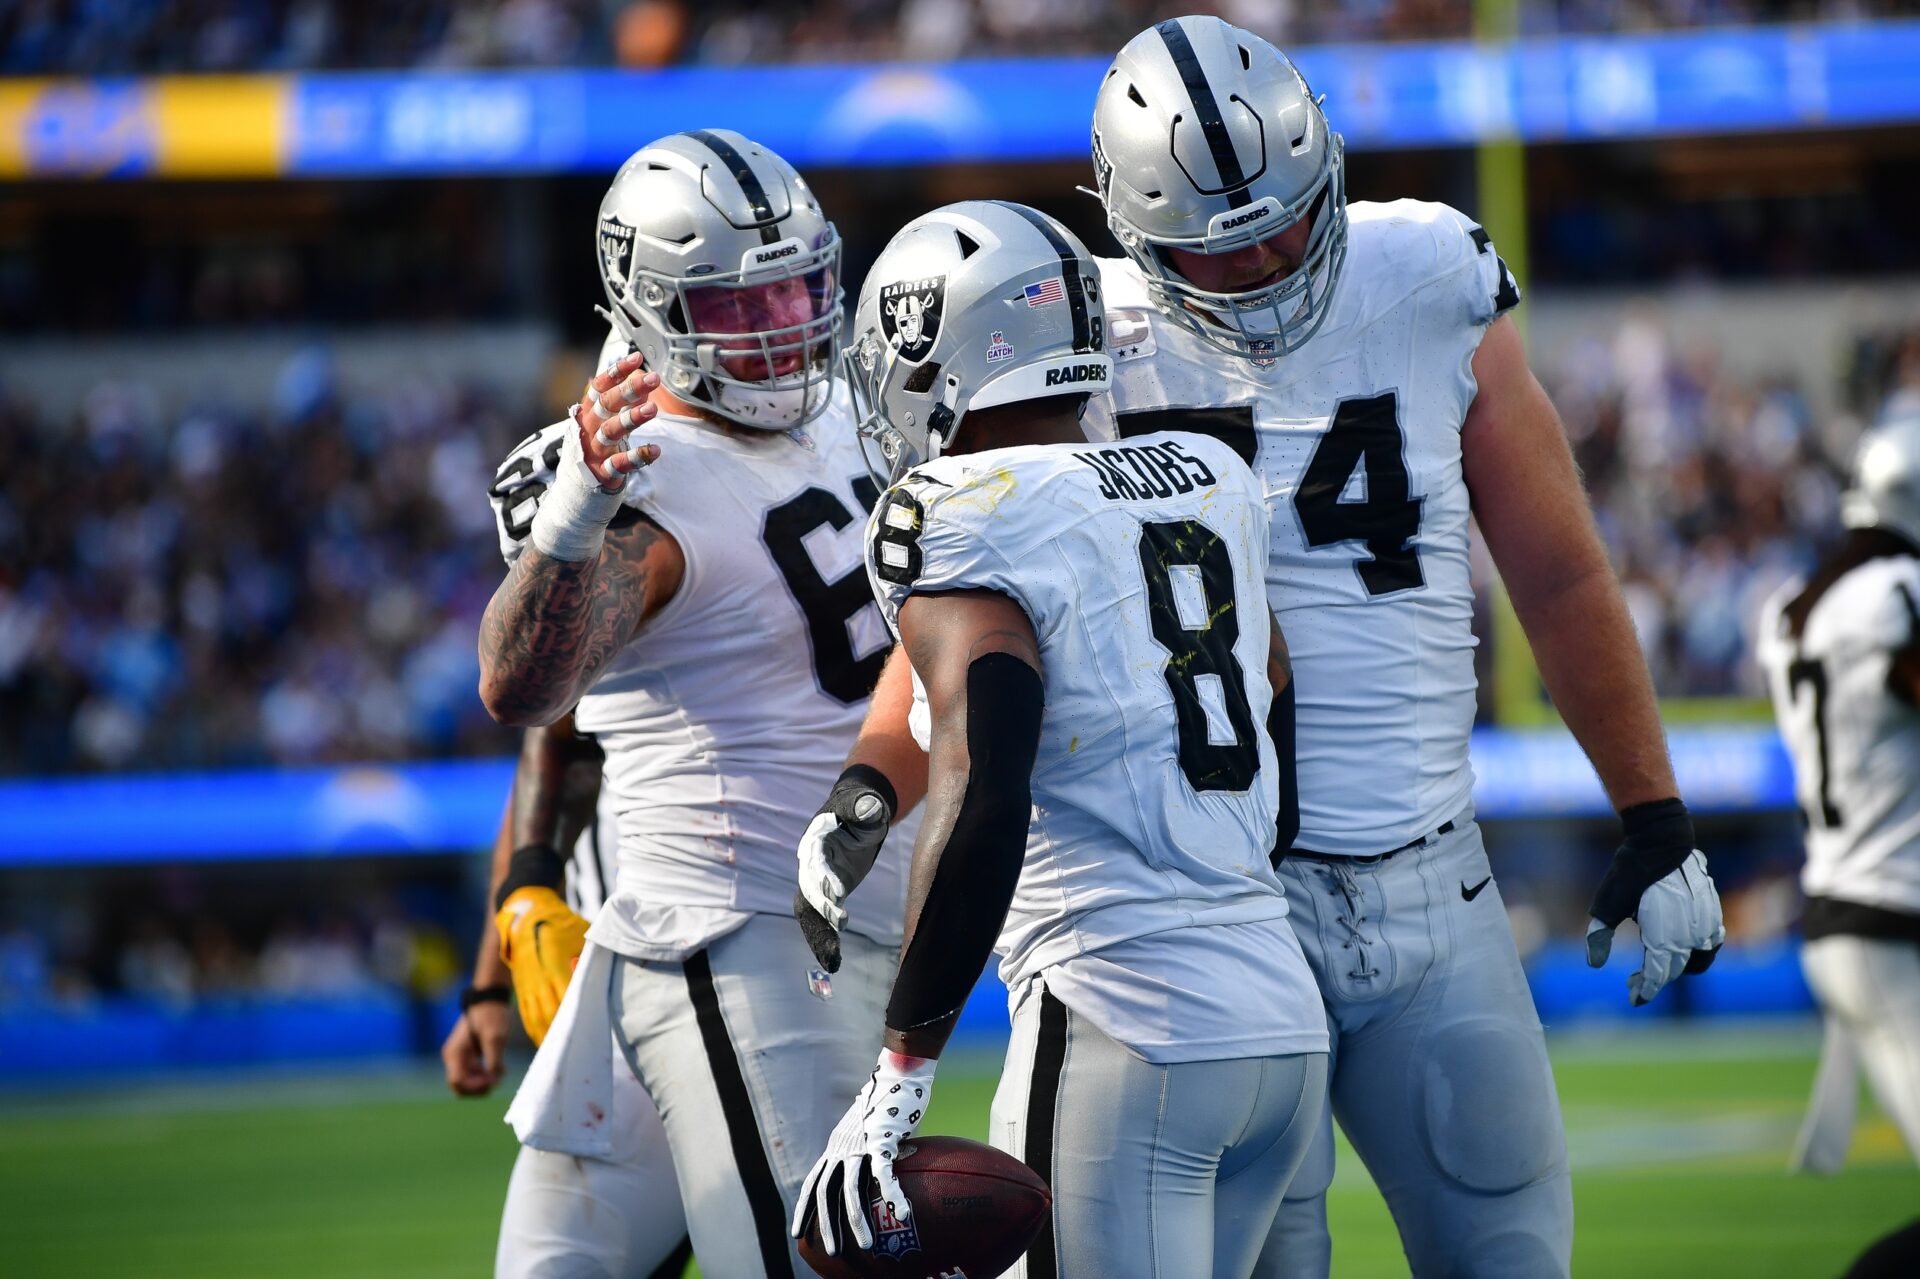 Las Vegas Raiders running back Josh Jacobs (8) celebrates his touchdown scored against the Los Angeles Chargers with guard Dylan Parham (66) and offensive tackle Kolton Miller (74) during the second half at SoFi Stadium.